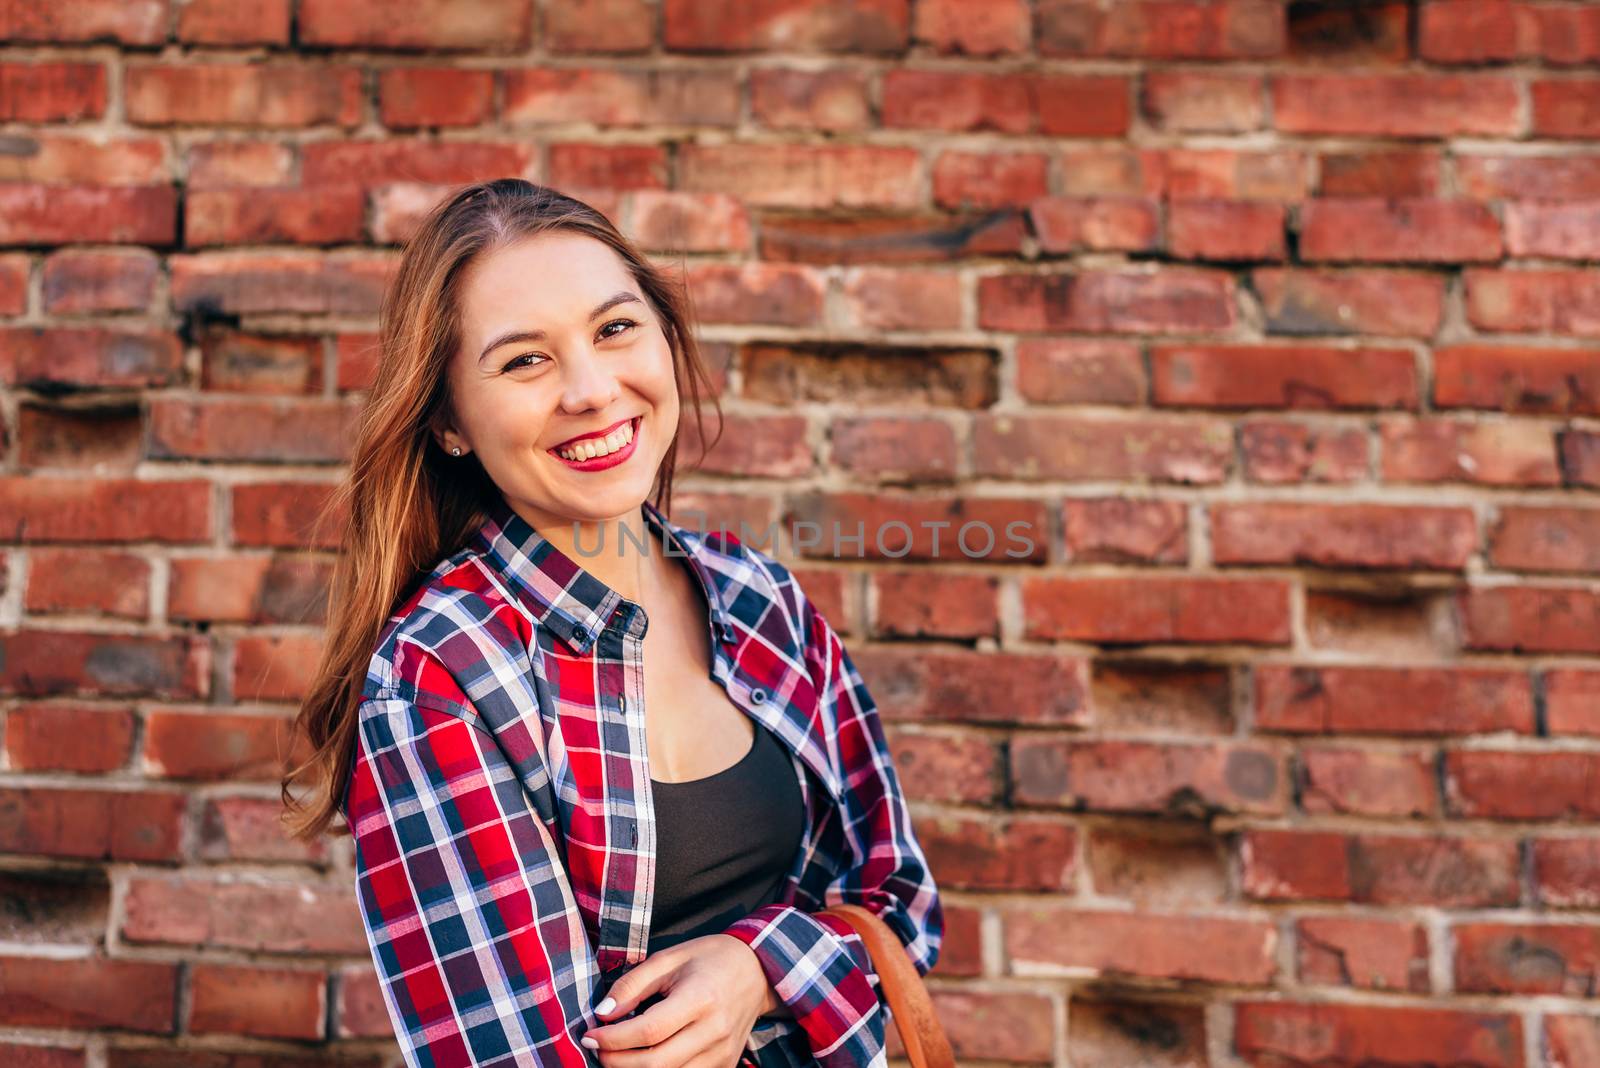 Portrait of young woman in checkered shirt standing against brick wall